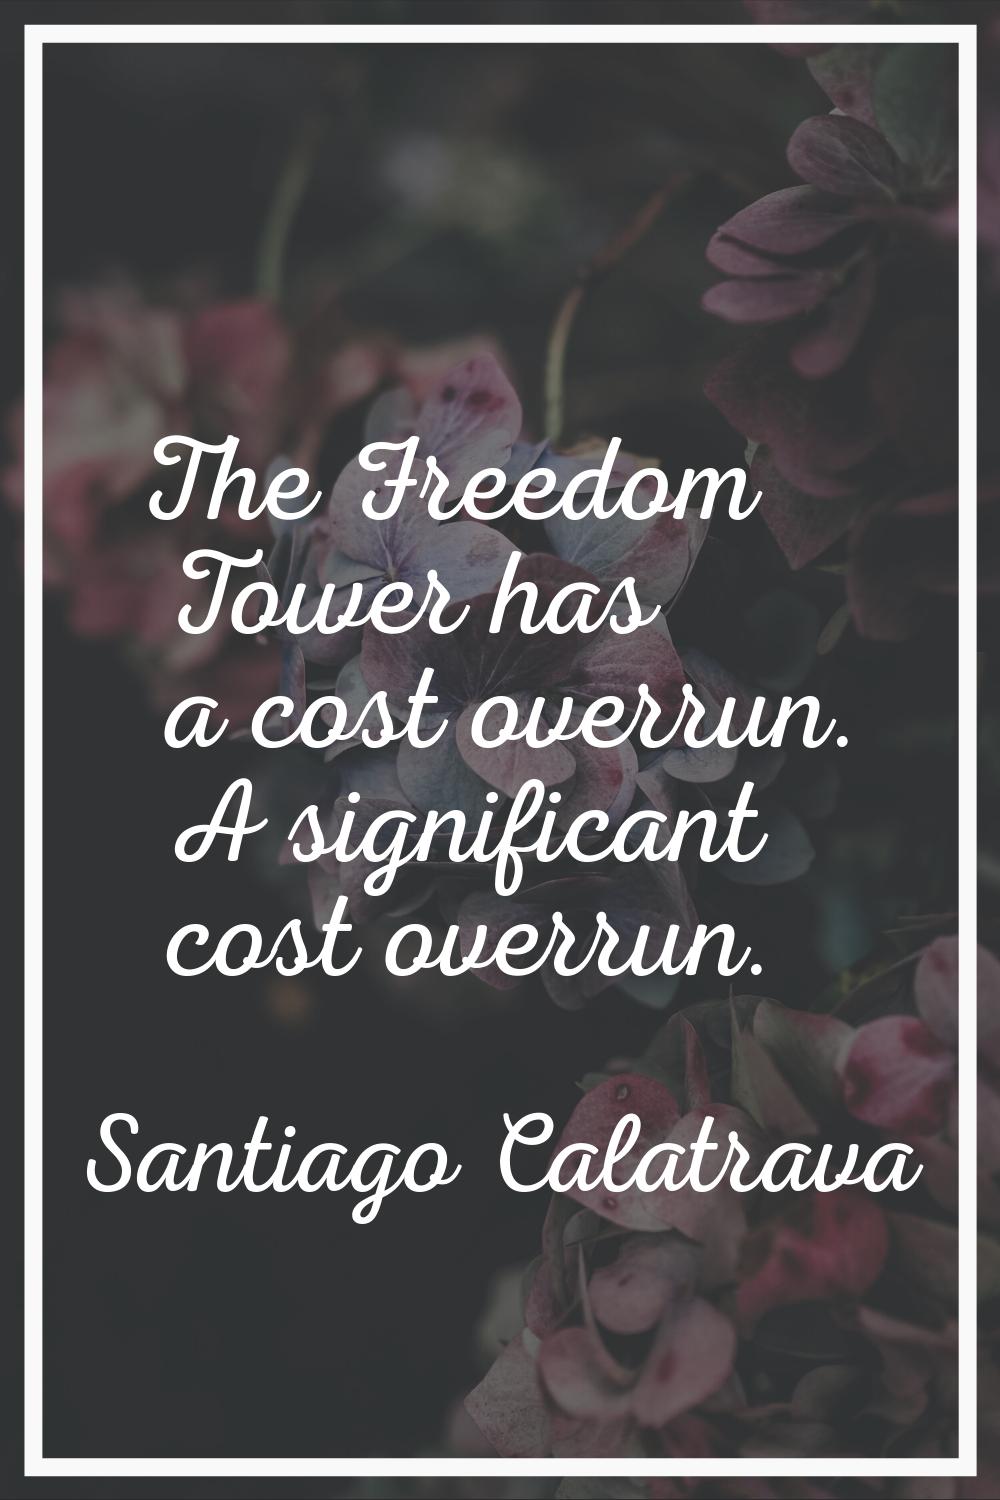 The Freedom Tower has a cost overrun. A significant cost overrun.